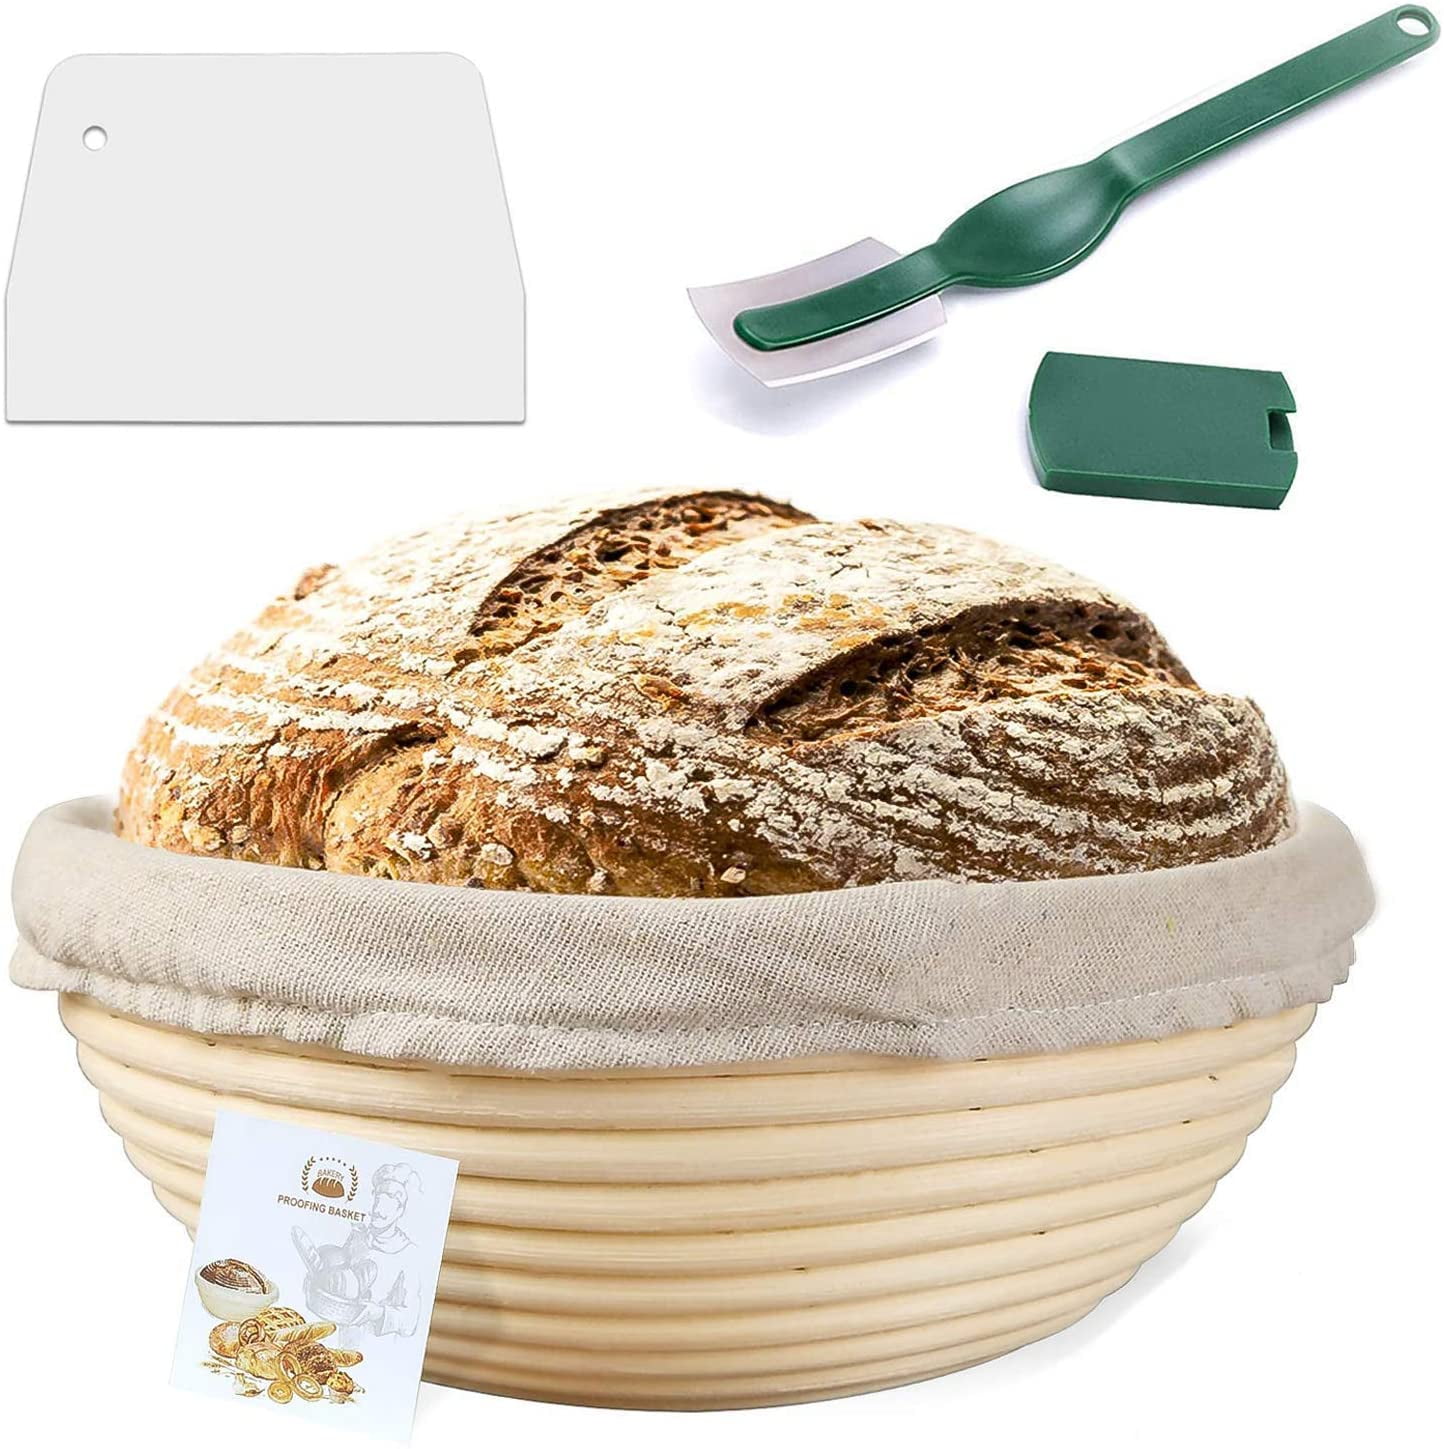 EarlySun Bread Proofing Basket Large Banneton Proving Basket Natural Rattan Sourdough Proving Basket for Professional Home Bakers with Cloth Liner, Dough Scraper, Bread Lame 